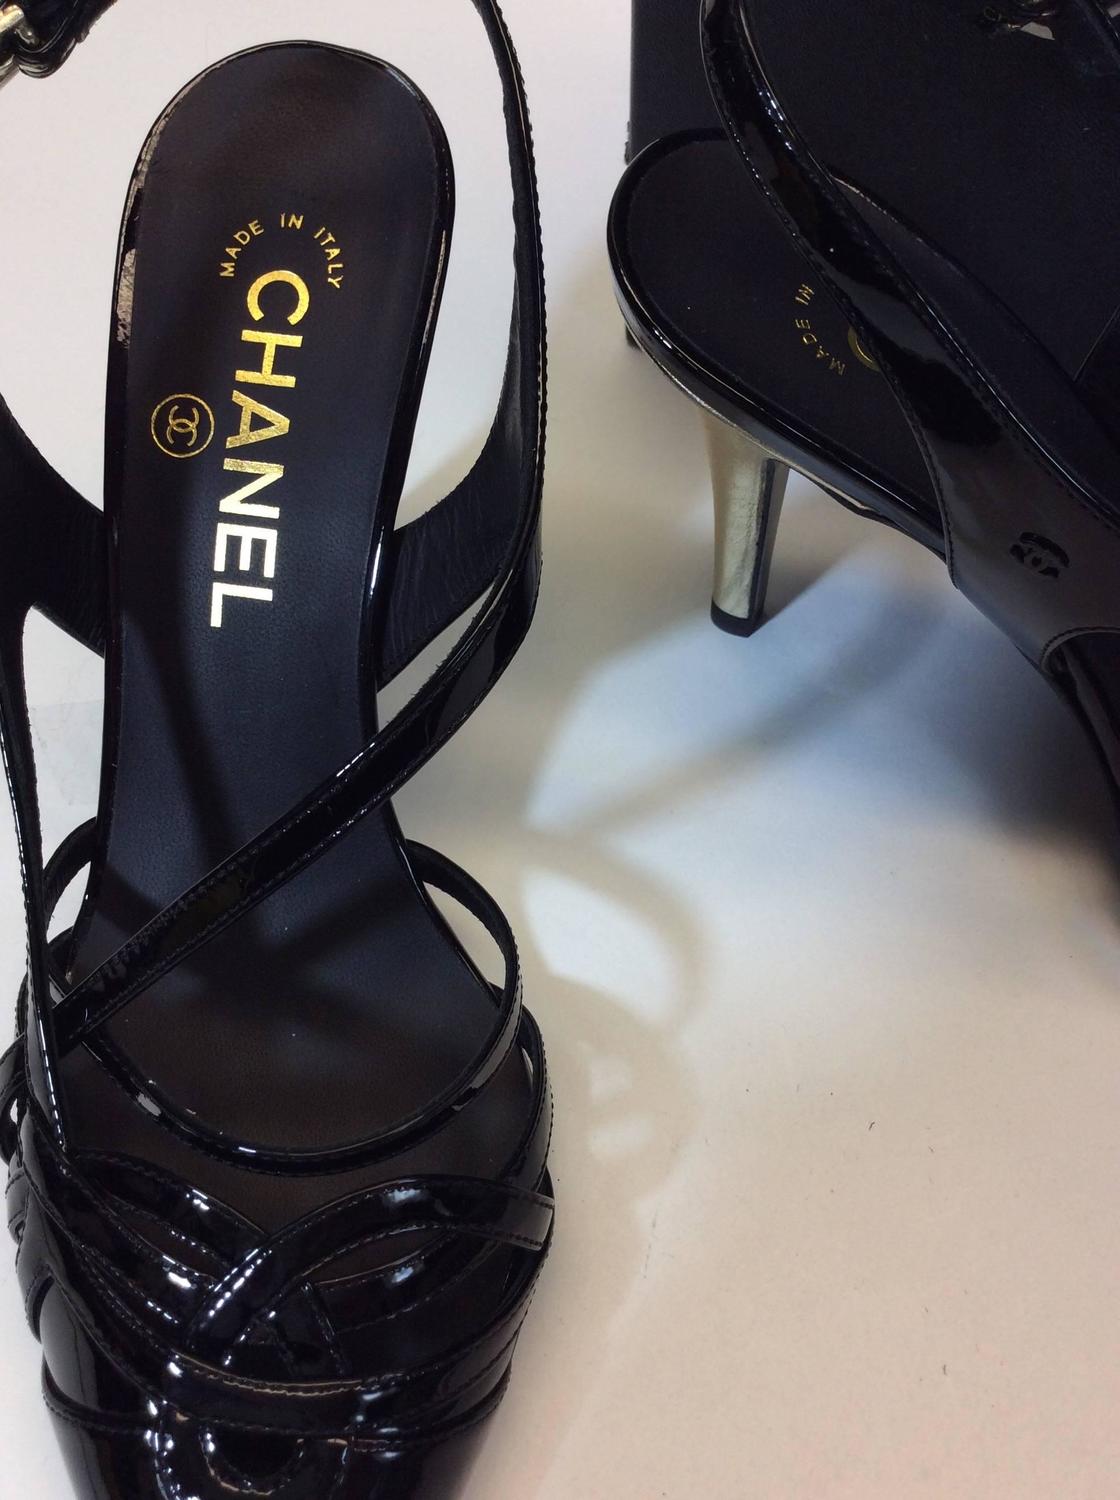 Chanel Black Patent Leather Strap Heel For Sale at 1stdibs